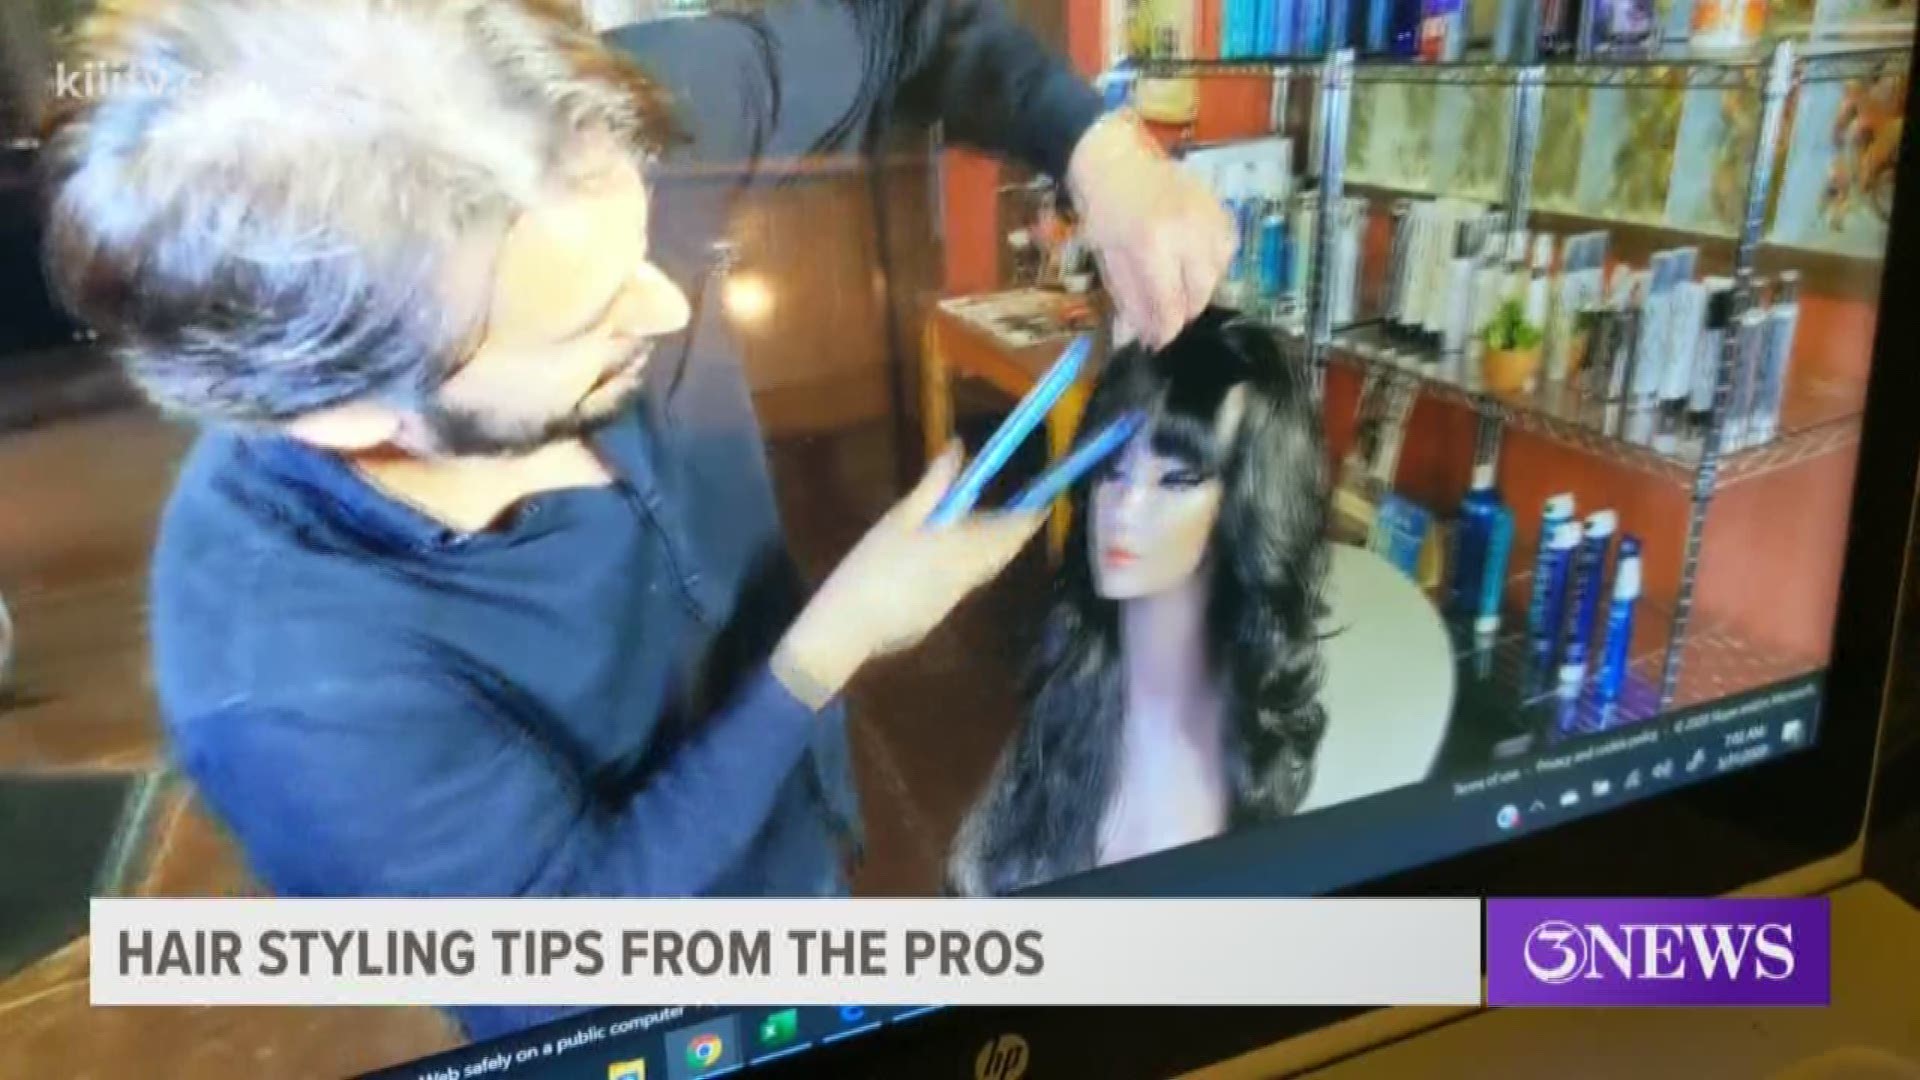 Hair styling tips from the pros | kiiitv.com